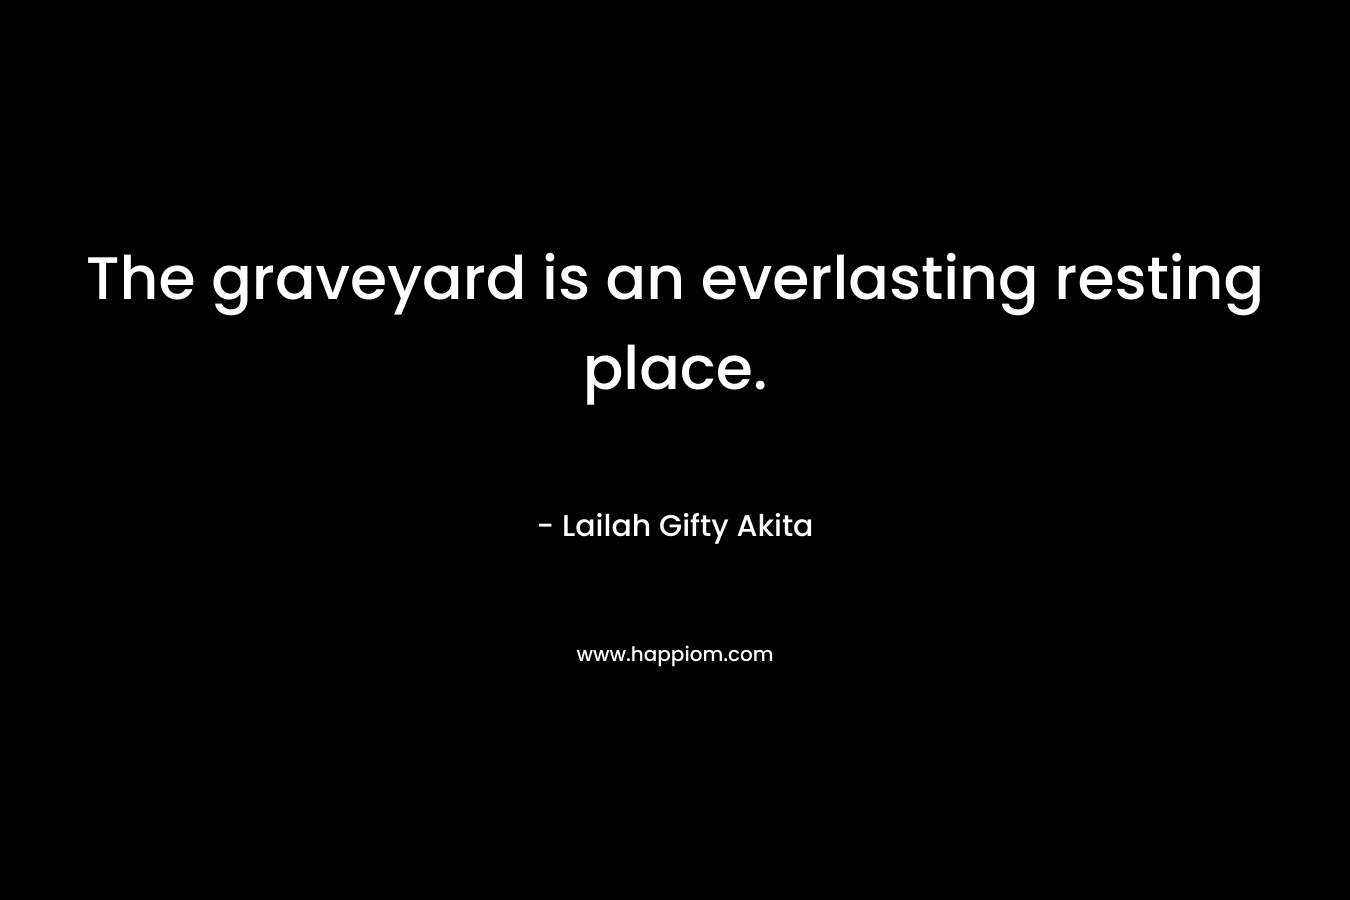 The graveyard is an everlasting resting place. – Lailah Gifty Akita